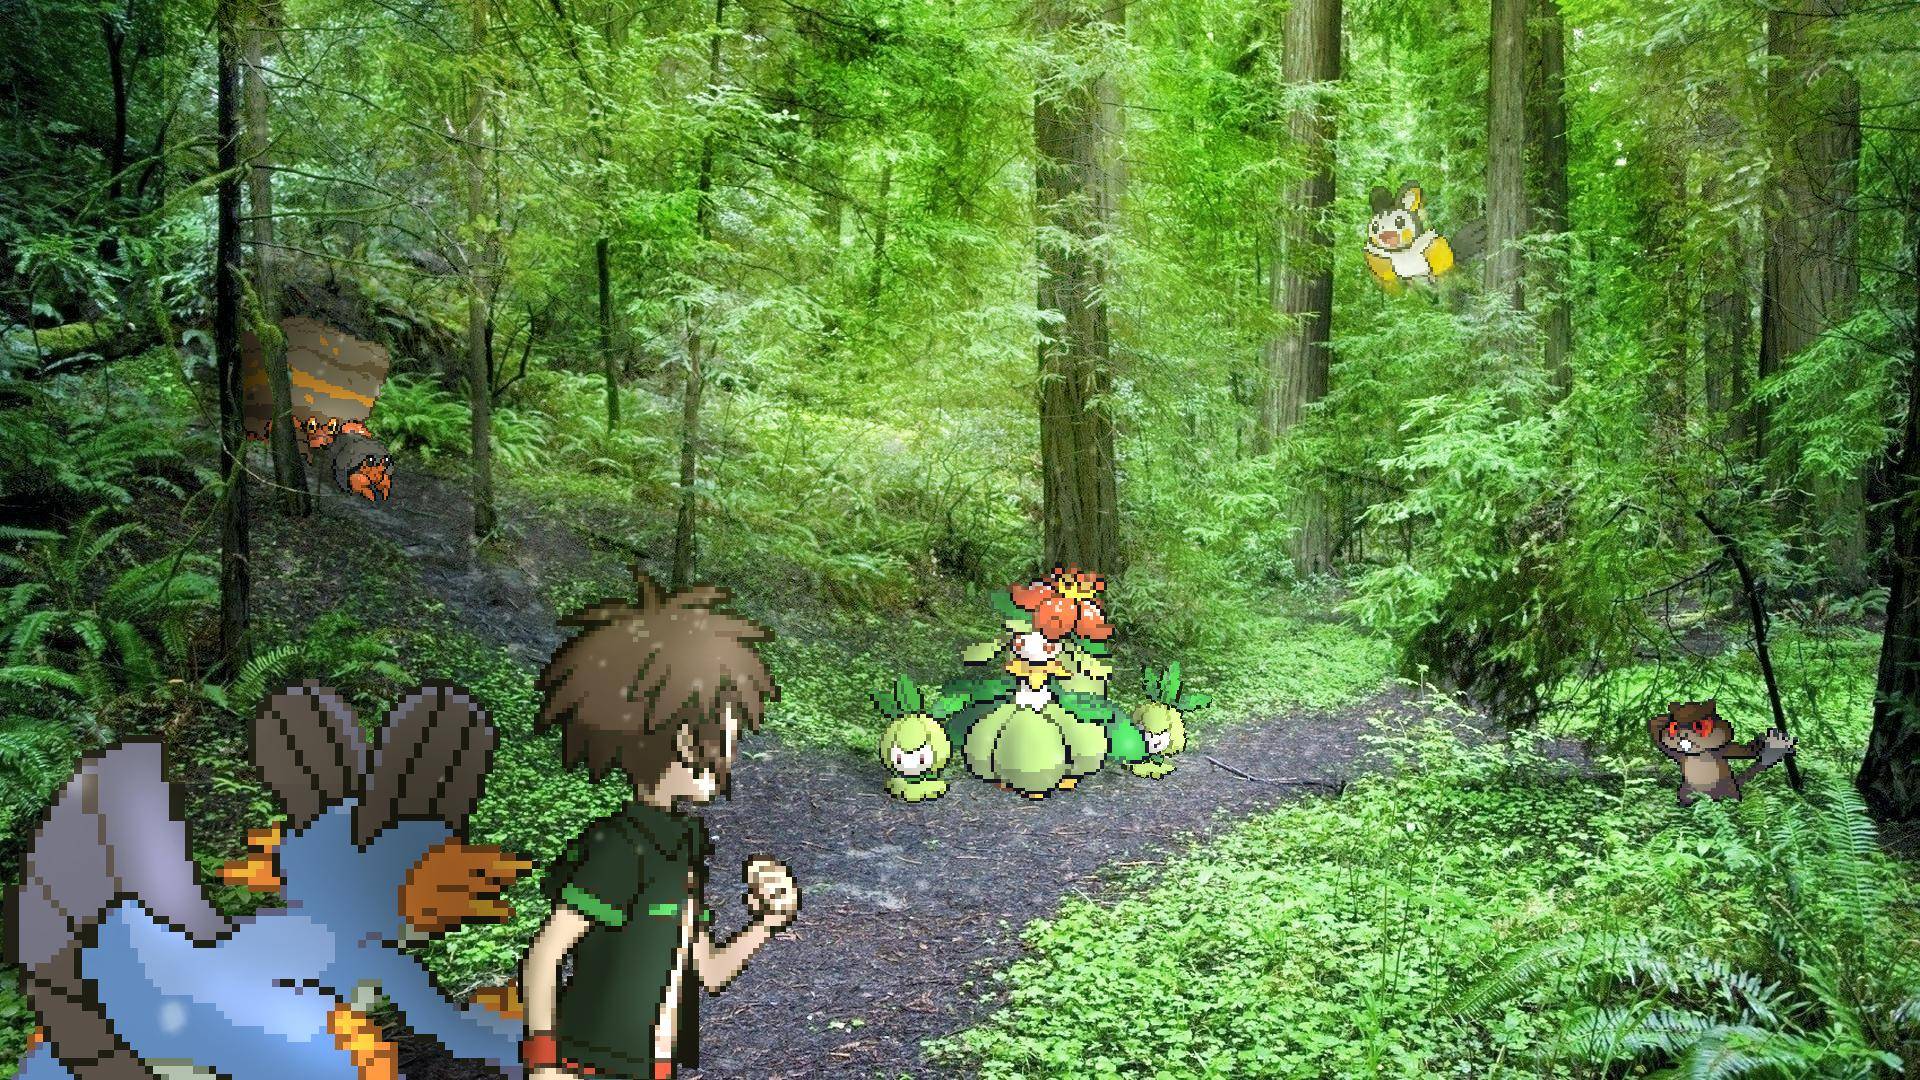 A hassle in the Pokémon Forest